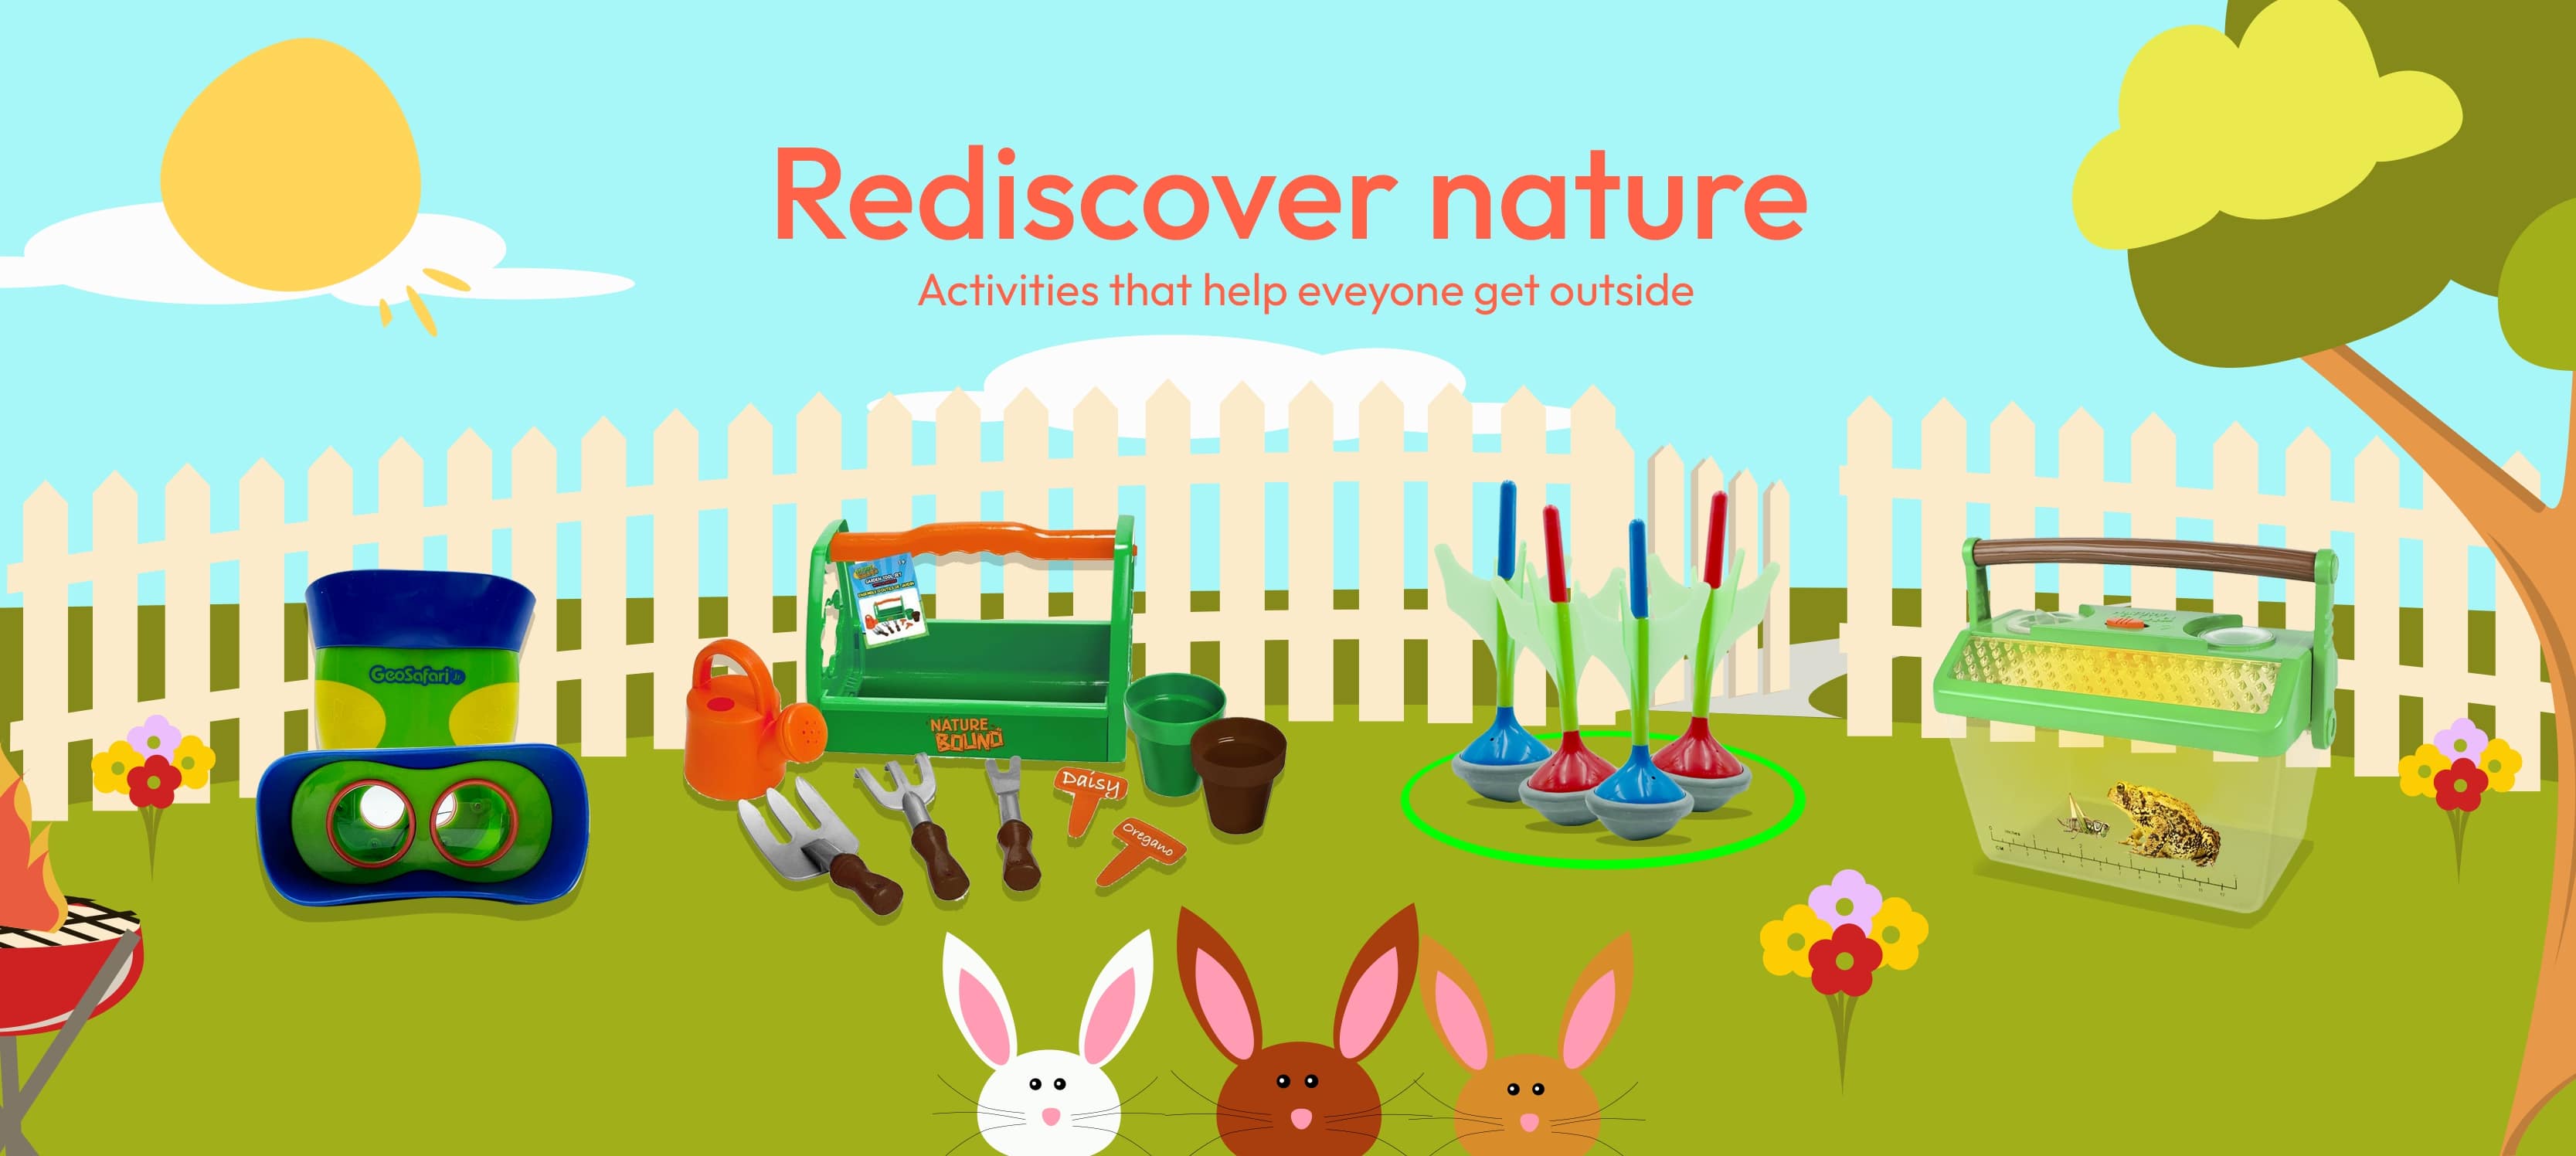 Rediscover nature. Activities to get everyone outdoors.